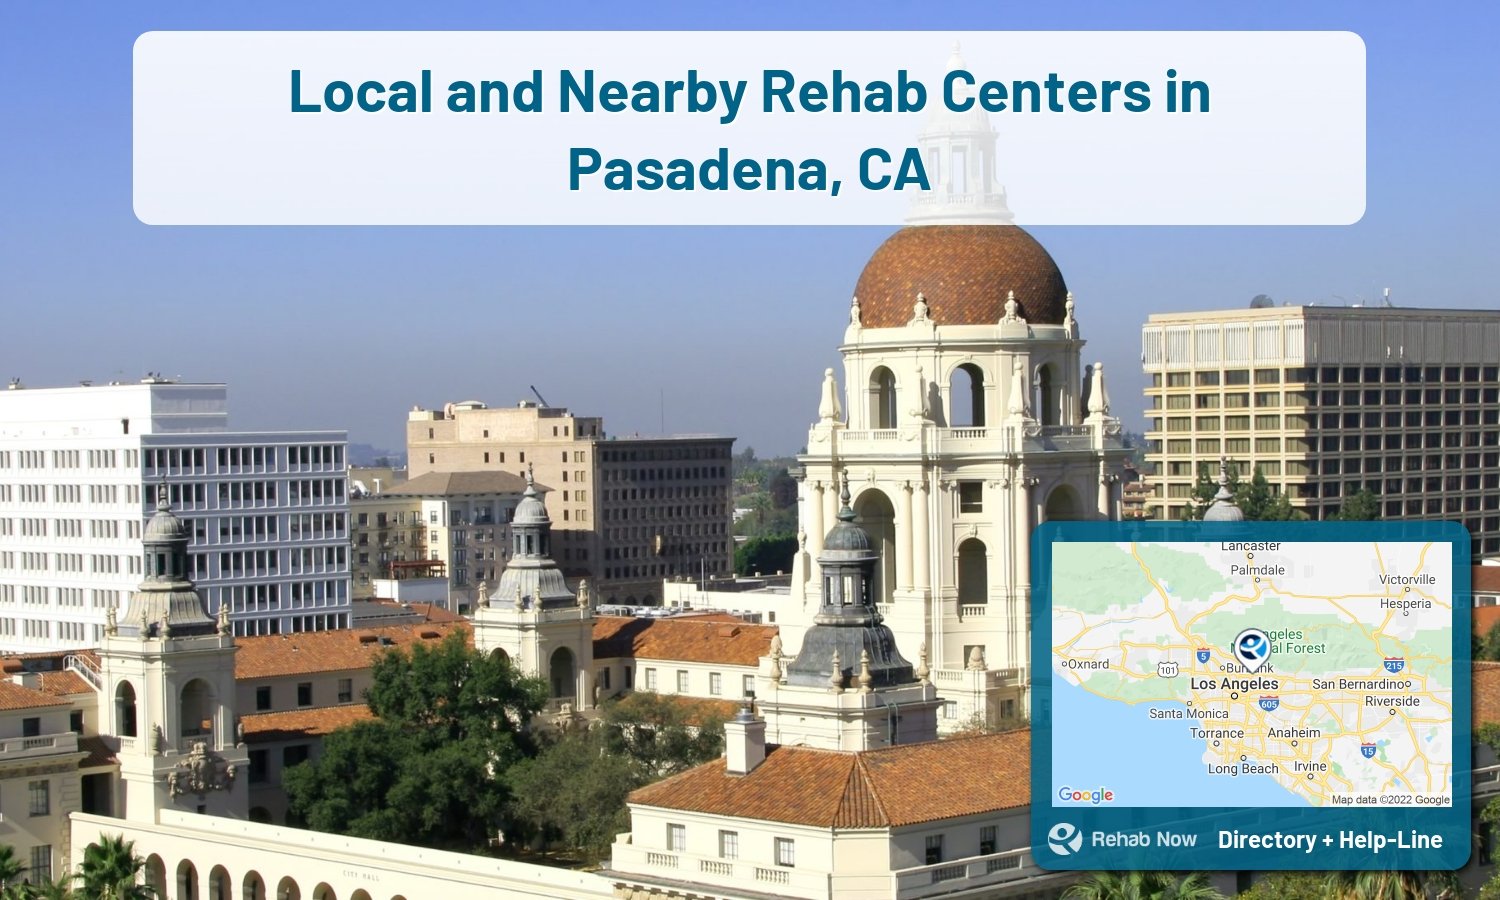 Pasadena, CA Treatment Centers. Find drug rehab in Pasadena, California, or detox and treatment programs. Get the right help now!